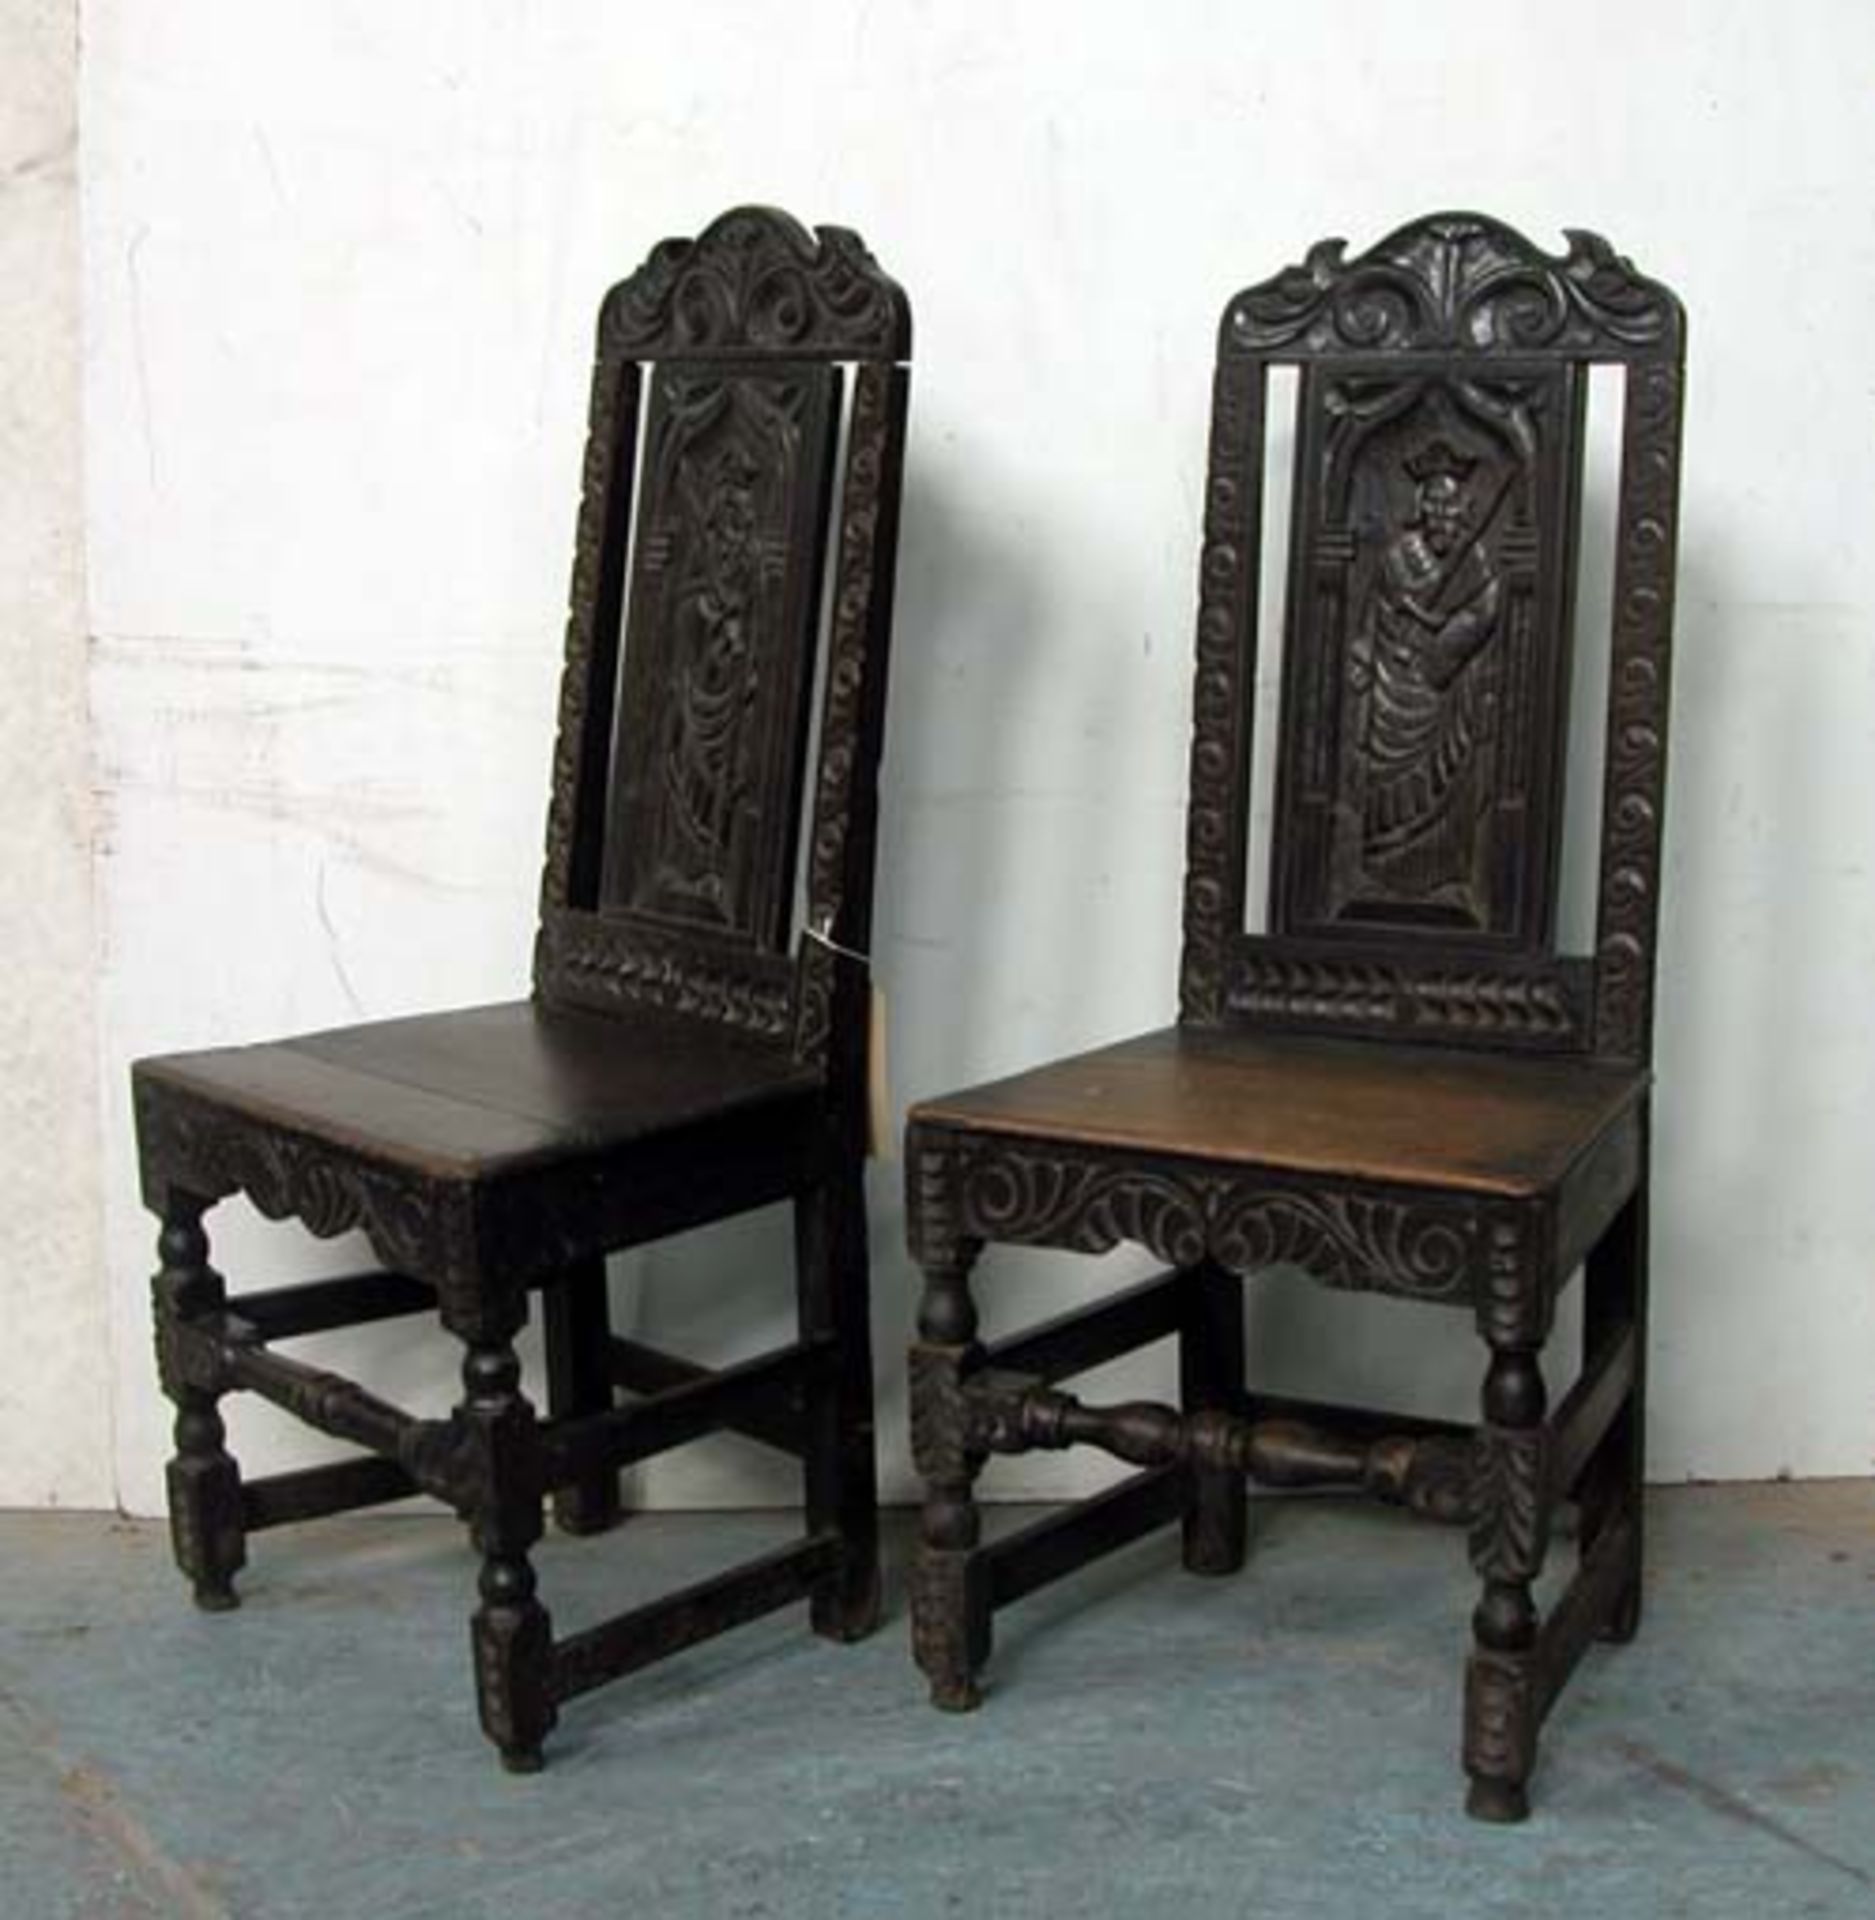 *PAIR OF OAK CHAIRS WITH CARVED MEDIEVAL FIGURES, LATE VICTORIAN. HEIGHT 1055MM (41.5IN) X WIDTH